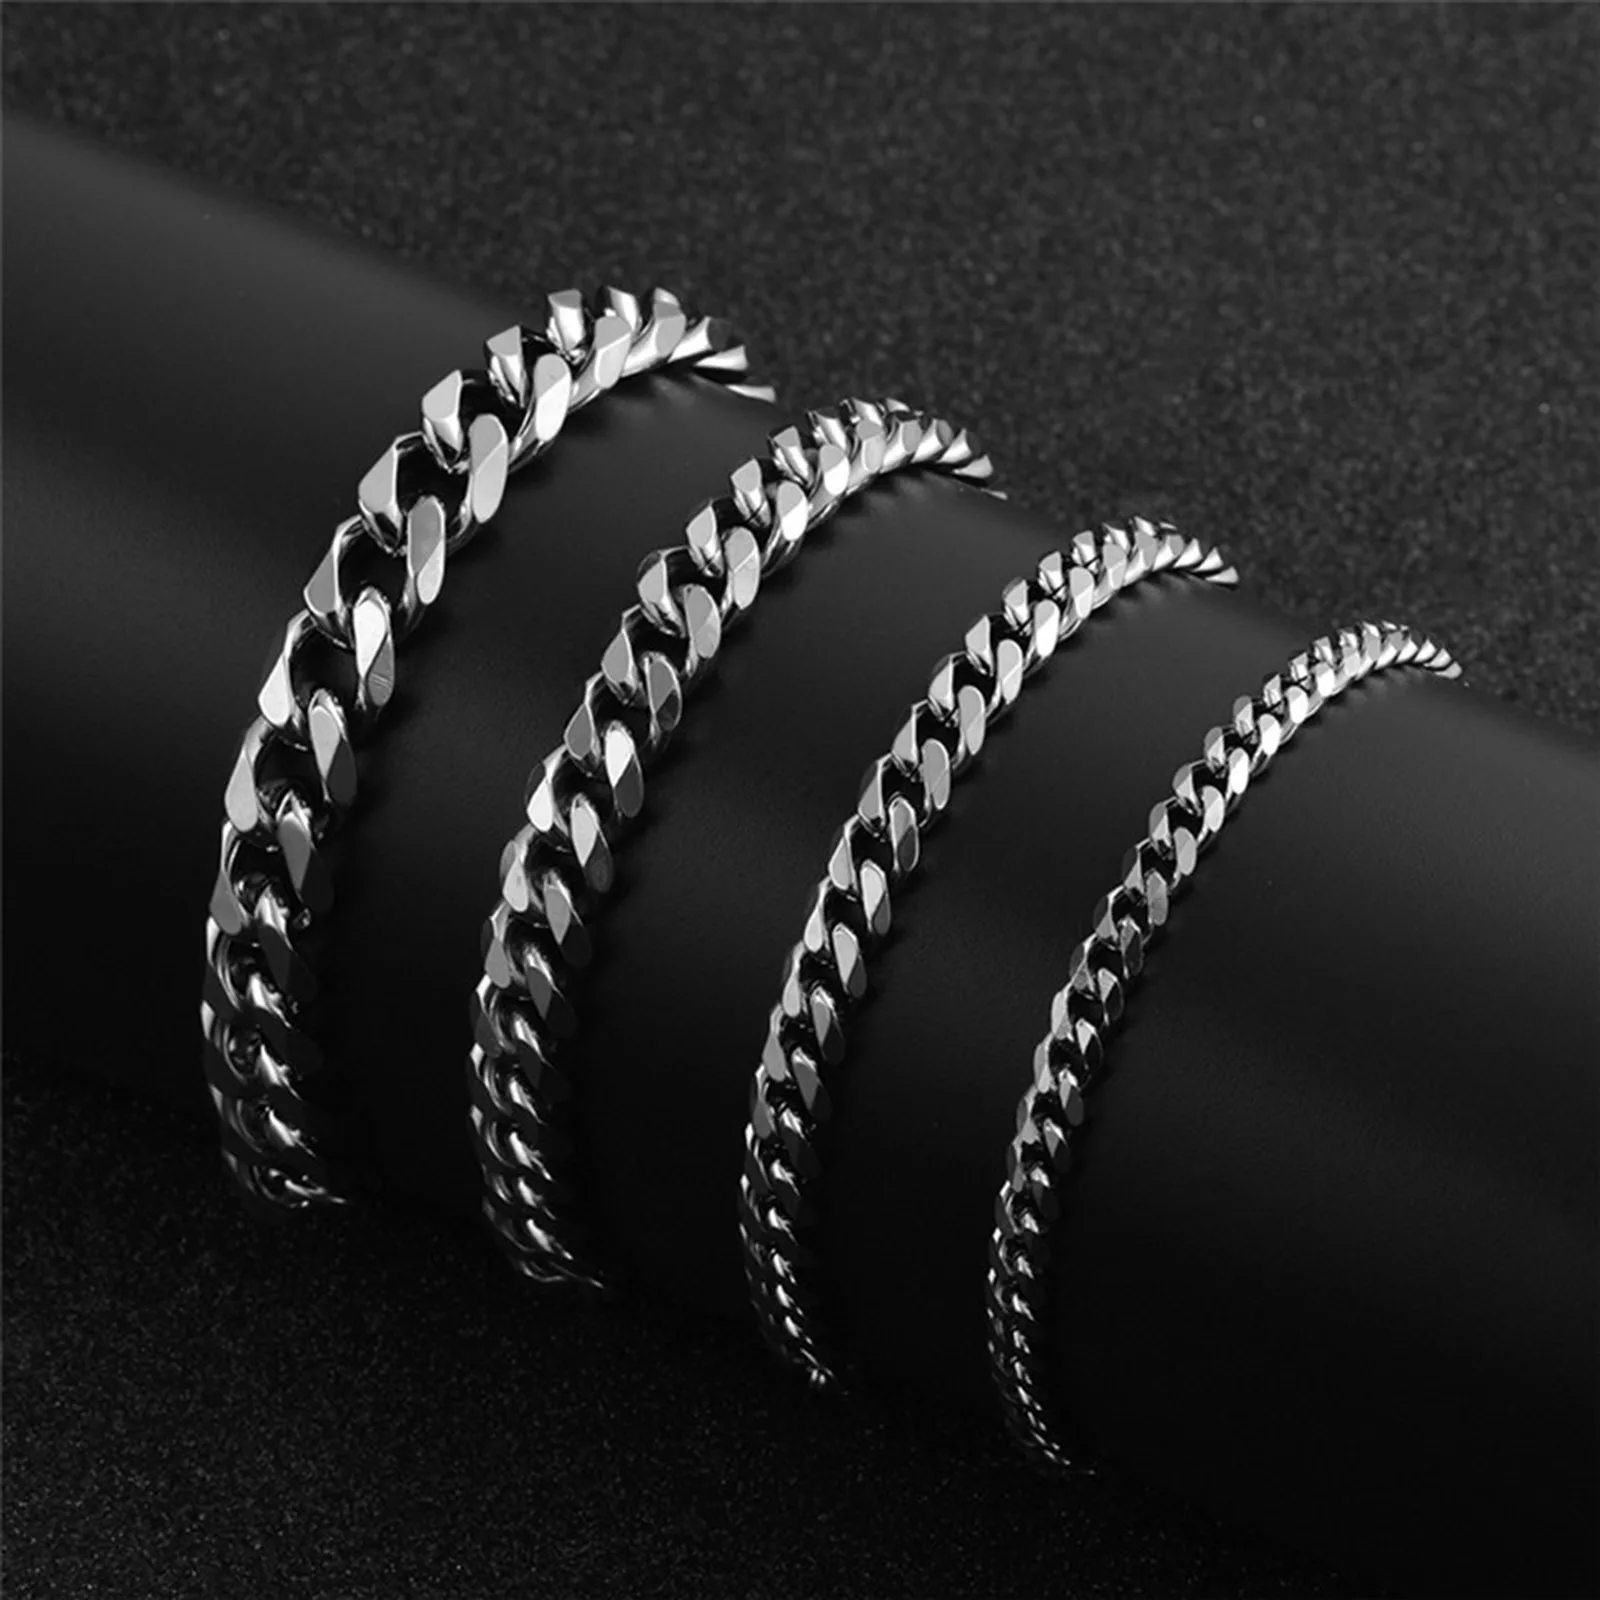 High Quality Stainless Steel Bracelets For Men Blank Color Punk Curb Cuban Link Chain Bracelets On the Hand Jewelry Gifts trend